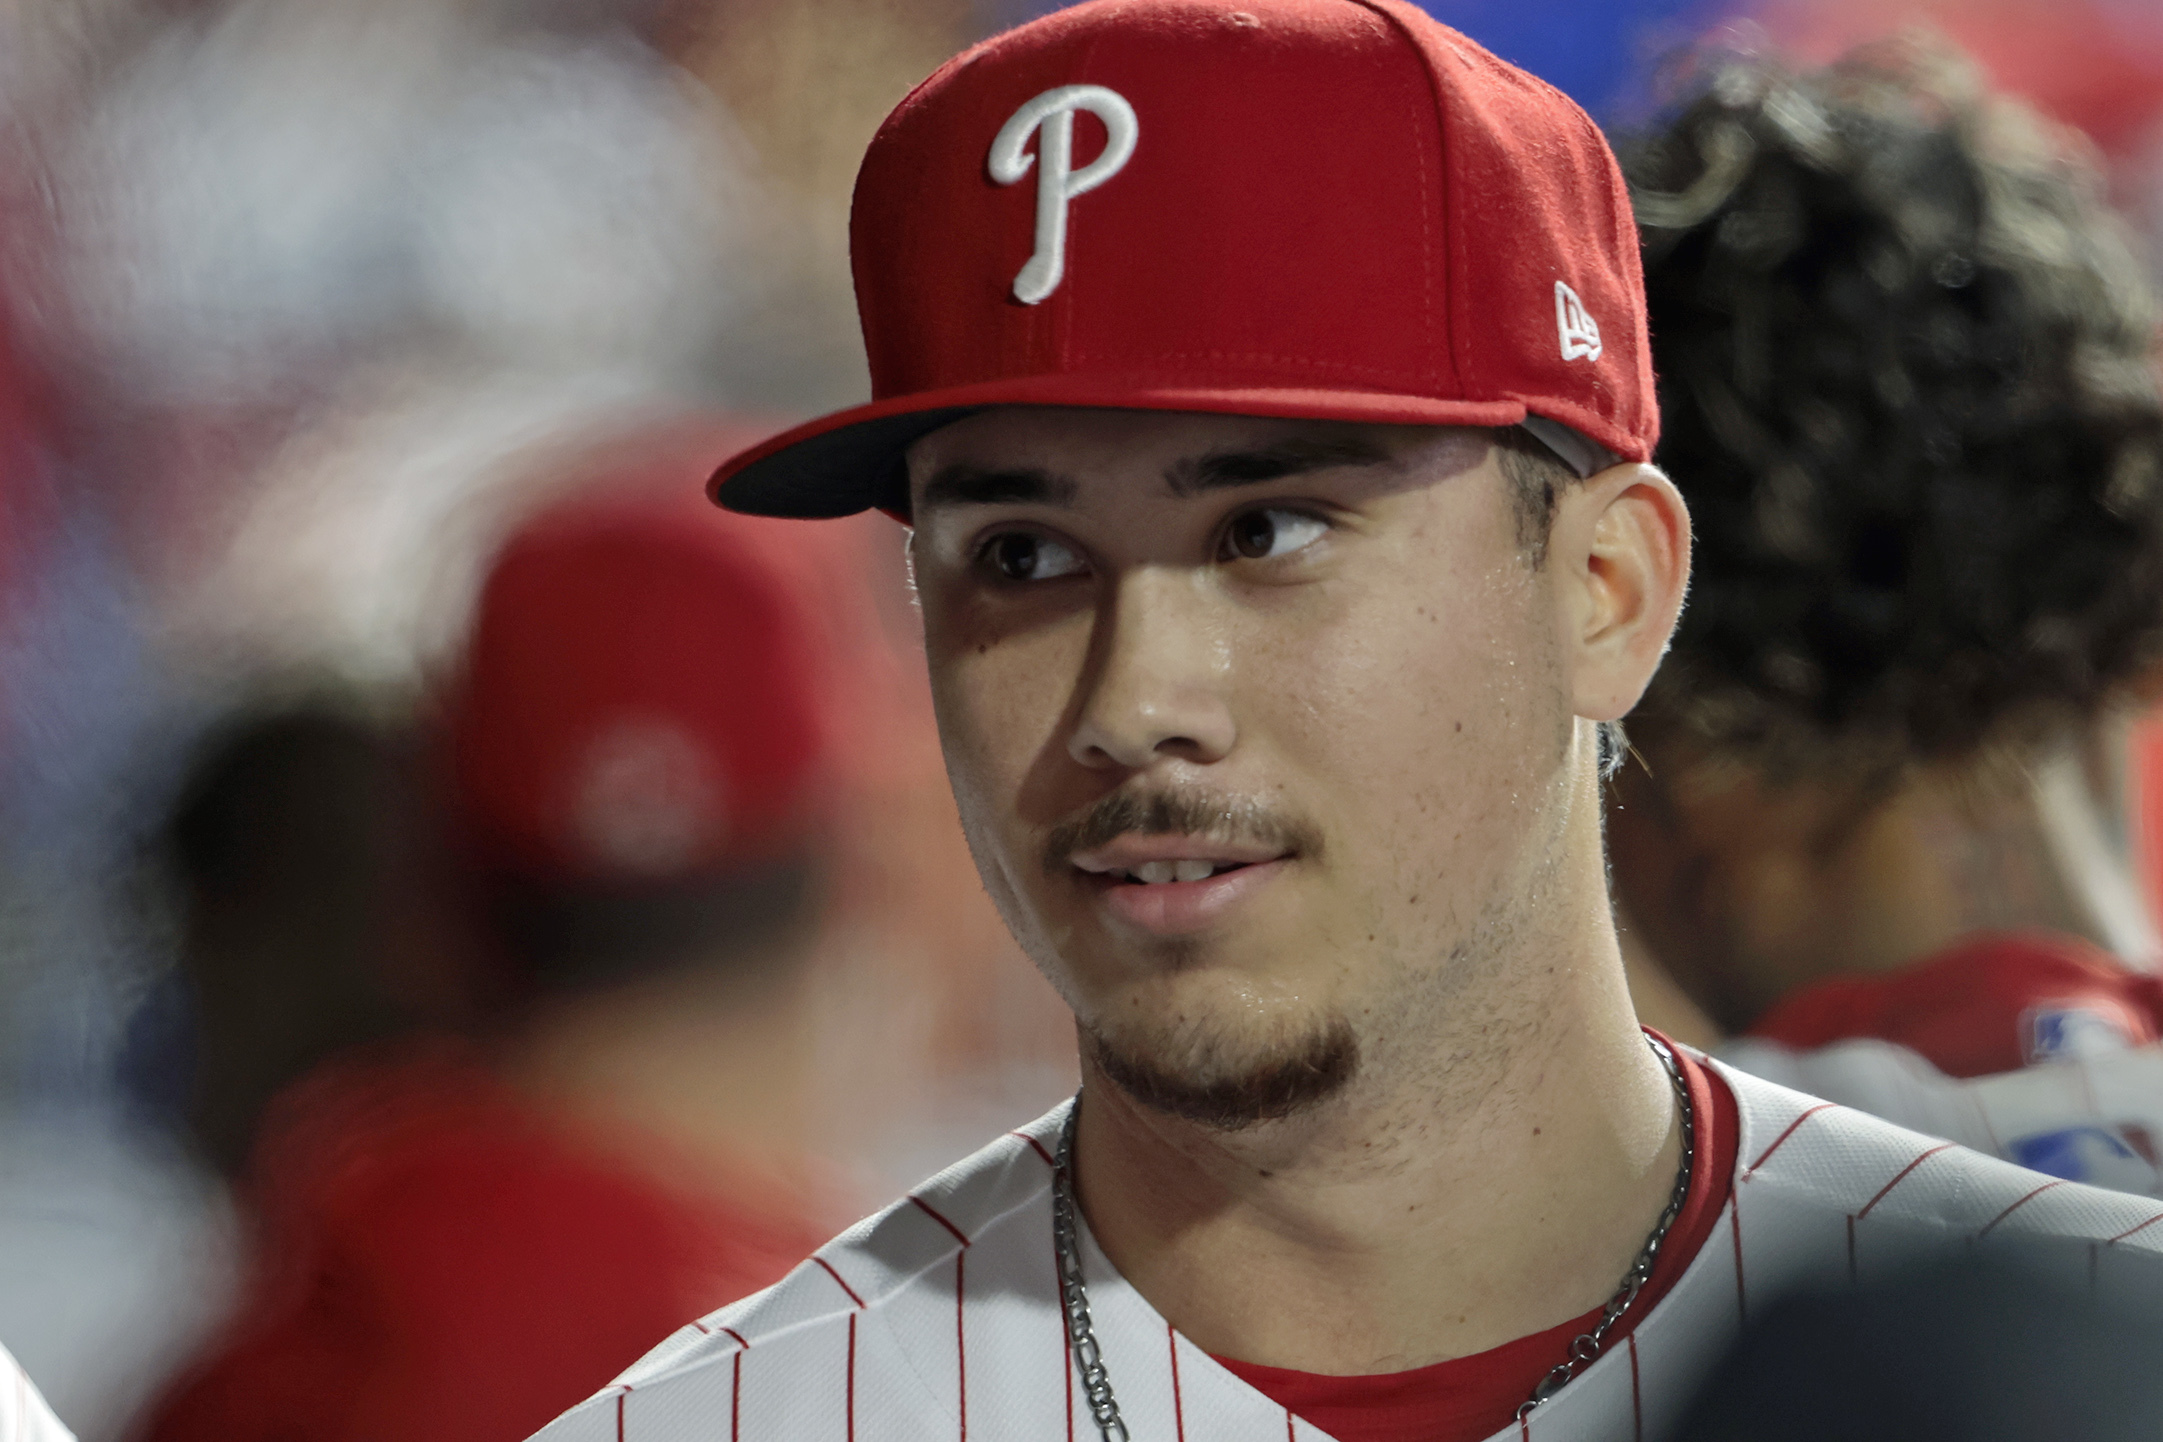 Orion Kerkering Might be Key To Fixing Phillies Bullpen Woes